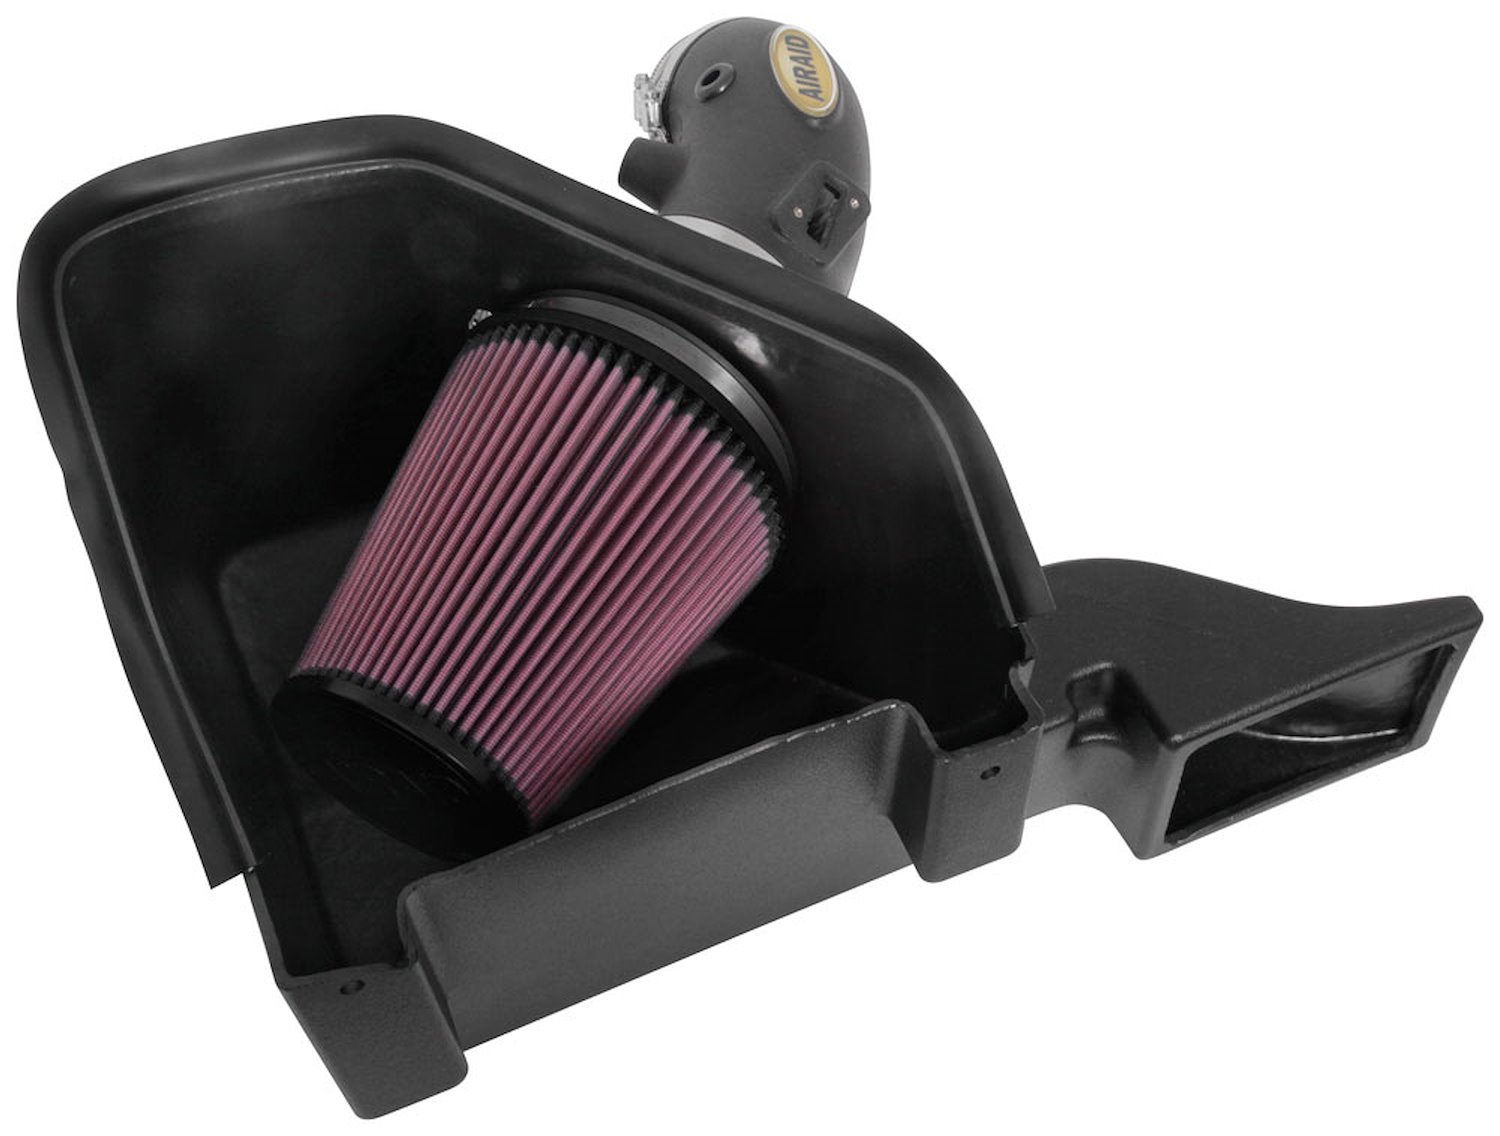 MXP Air Intake System 2014-2018 Ram 2500, 3500 6.4L V8 Fuel Injected - SynthaMax 'Dry' Filter